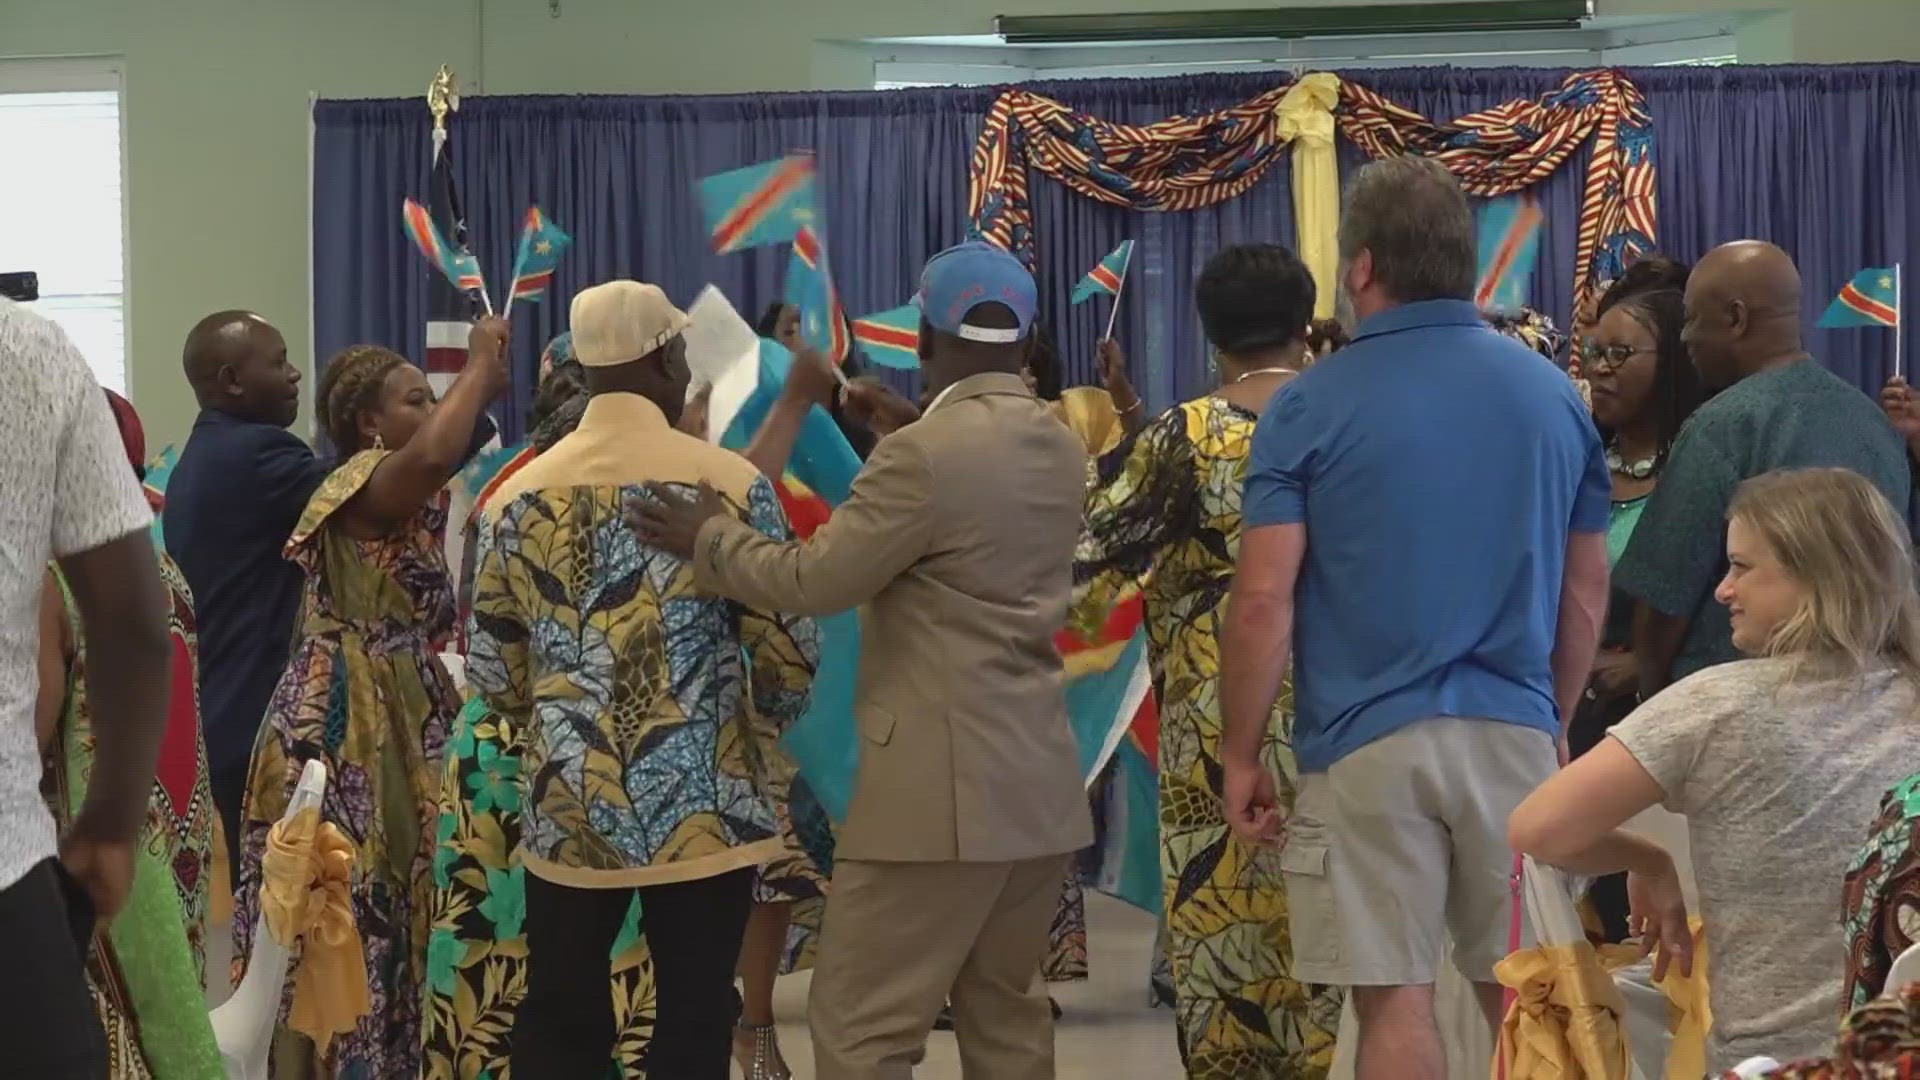 It was the 63rd celebration of the independence of the Democratic Republic of Congo. The Congolese community came together to celebrate their freedom from Belgium.